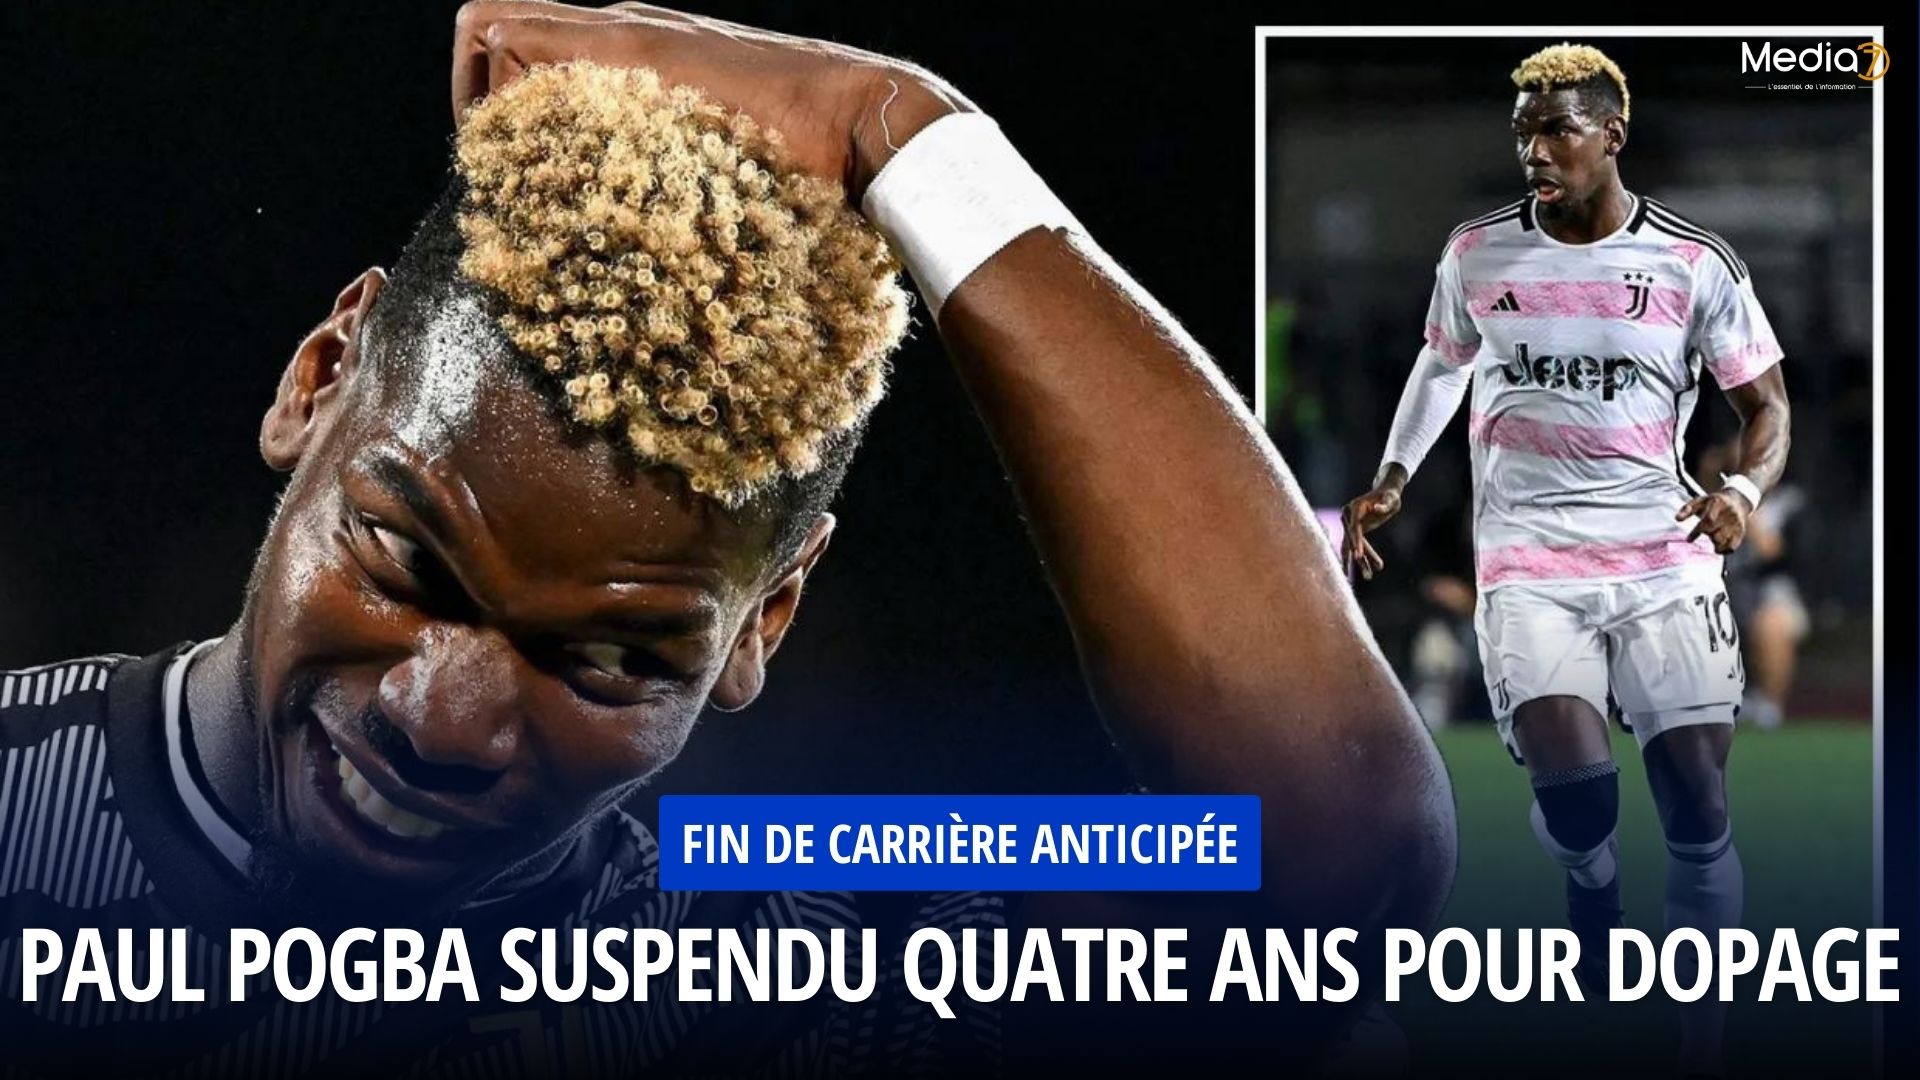 Paul Pogba suspended four years for doping: Early end of career for the French midfielder - Media7